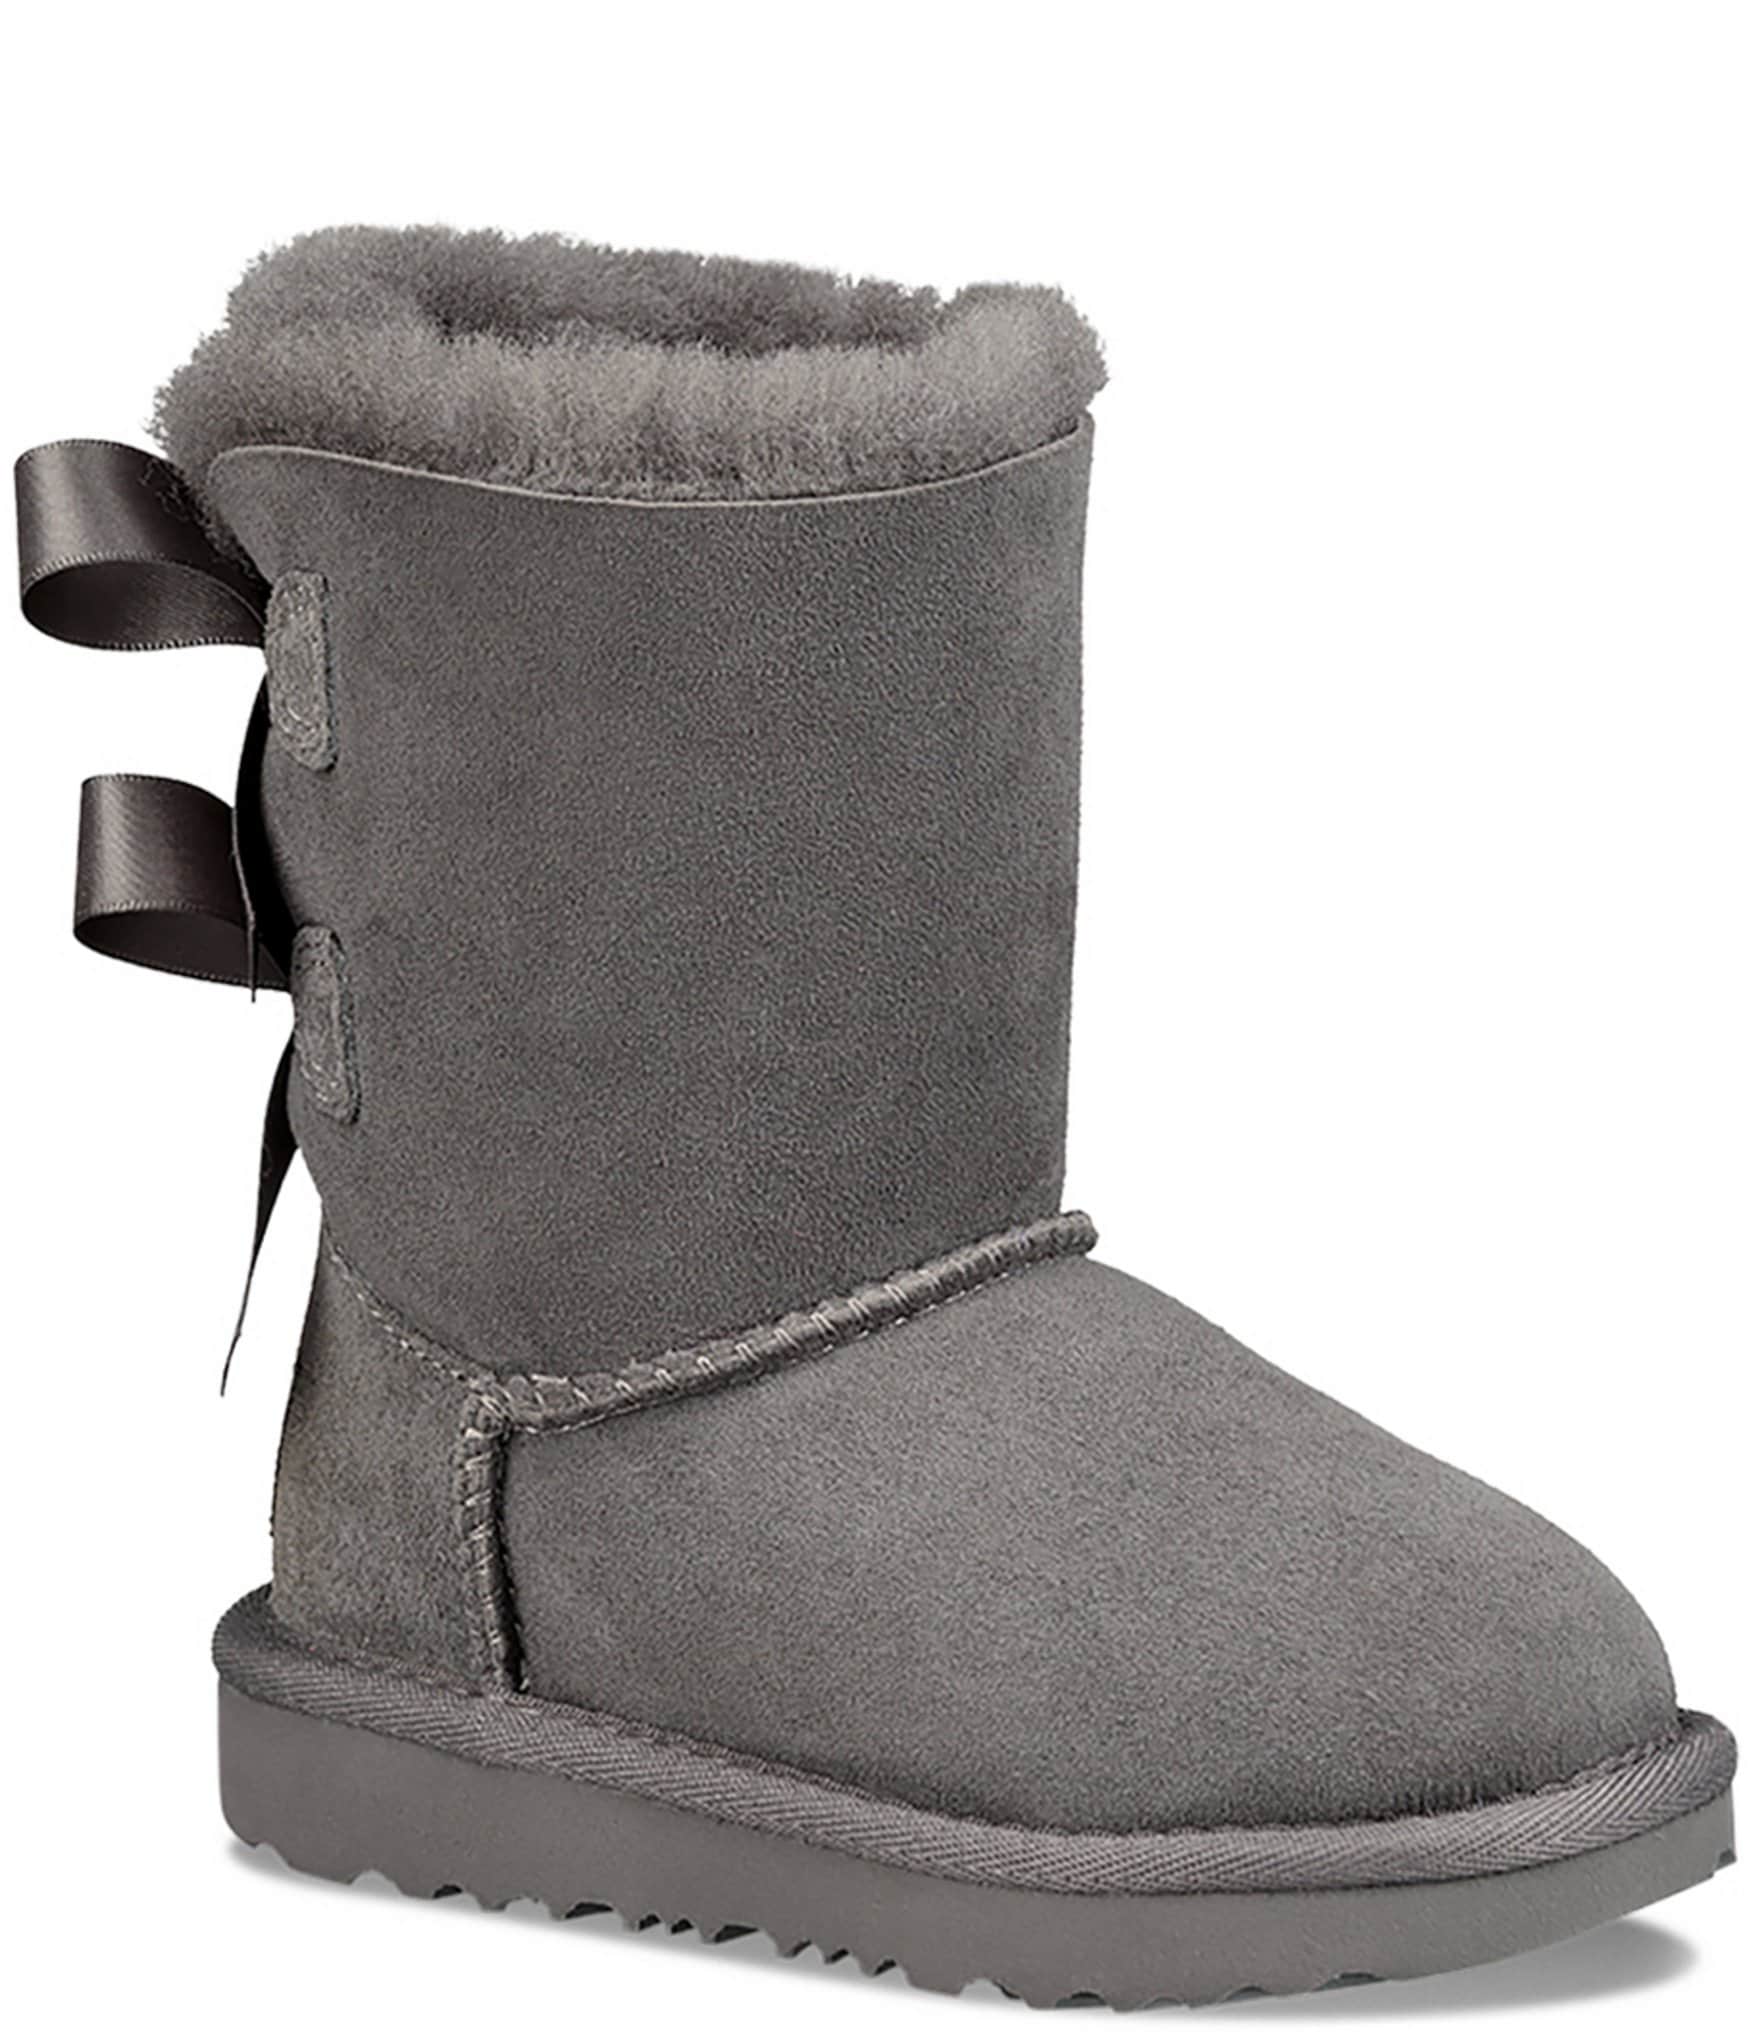 UGG Boots, Shoes, Slippers, Accessories 